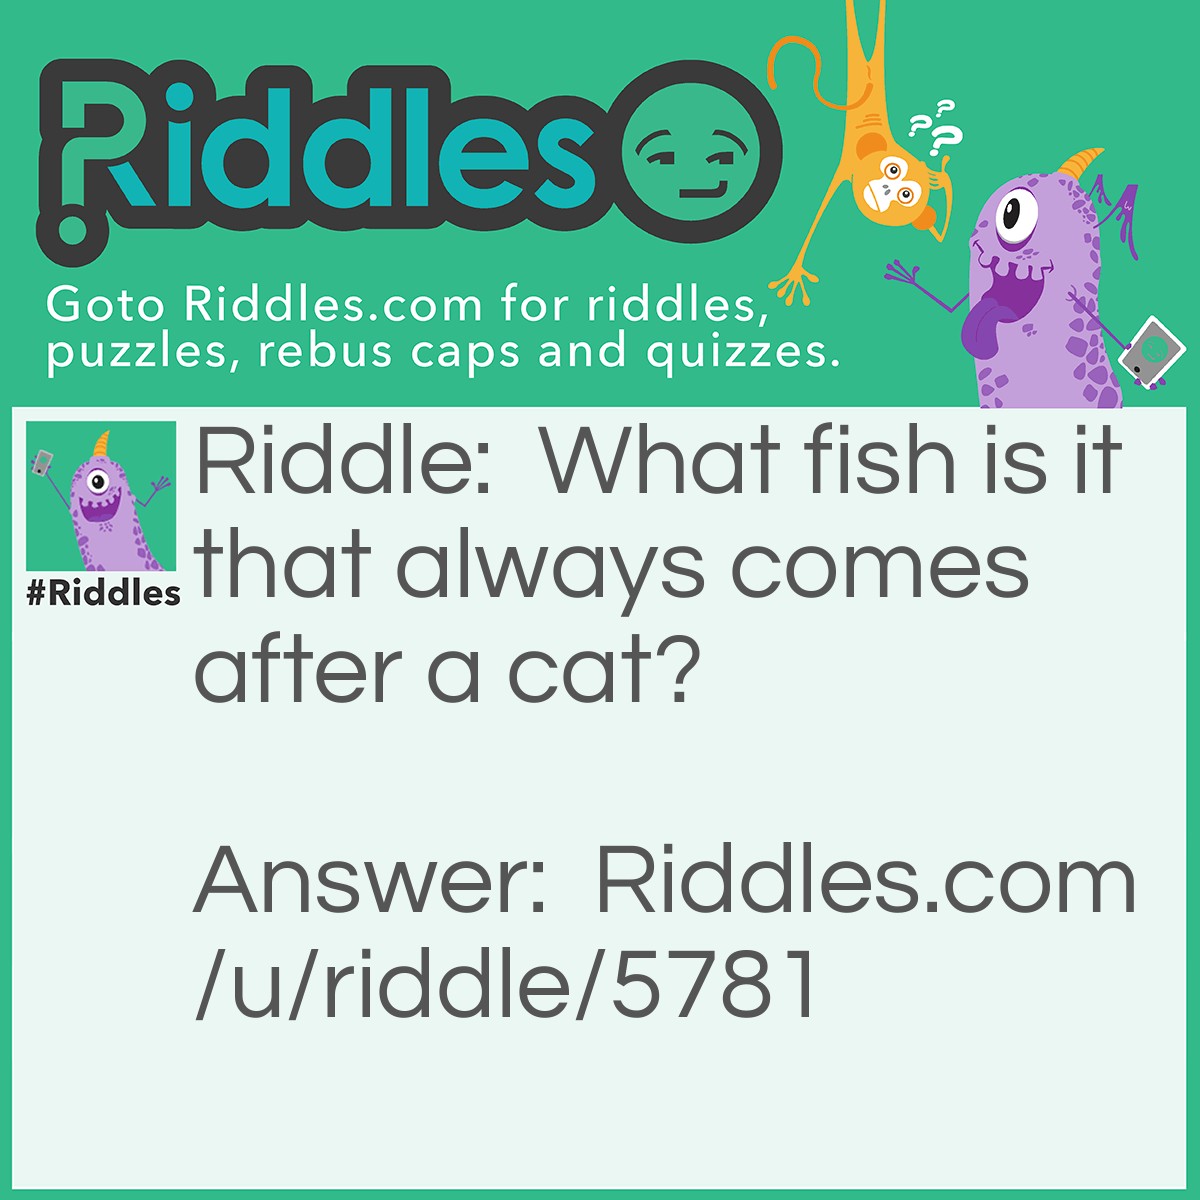 Riddle: What fish is it that always comes after a cat? Answer: A CATfish.